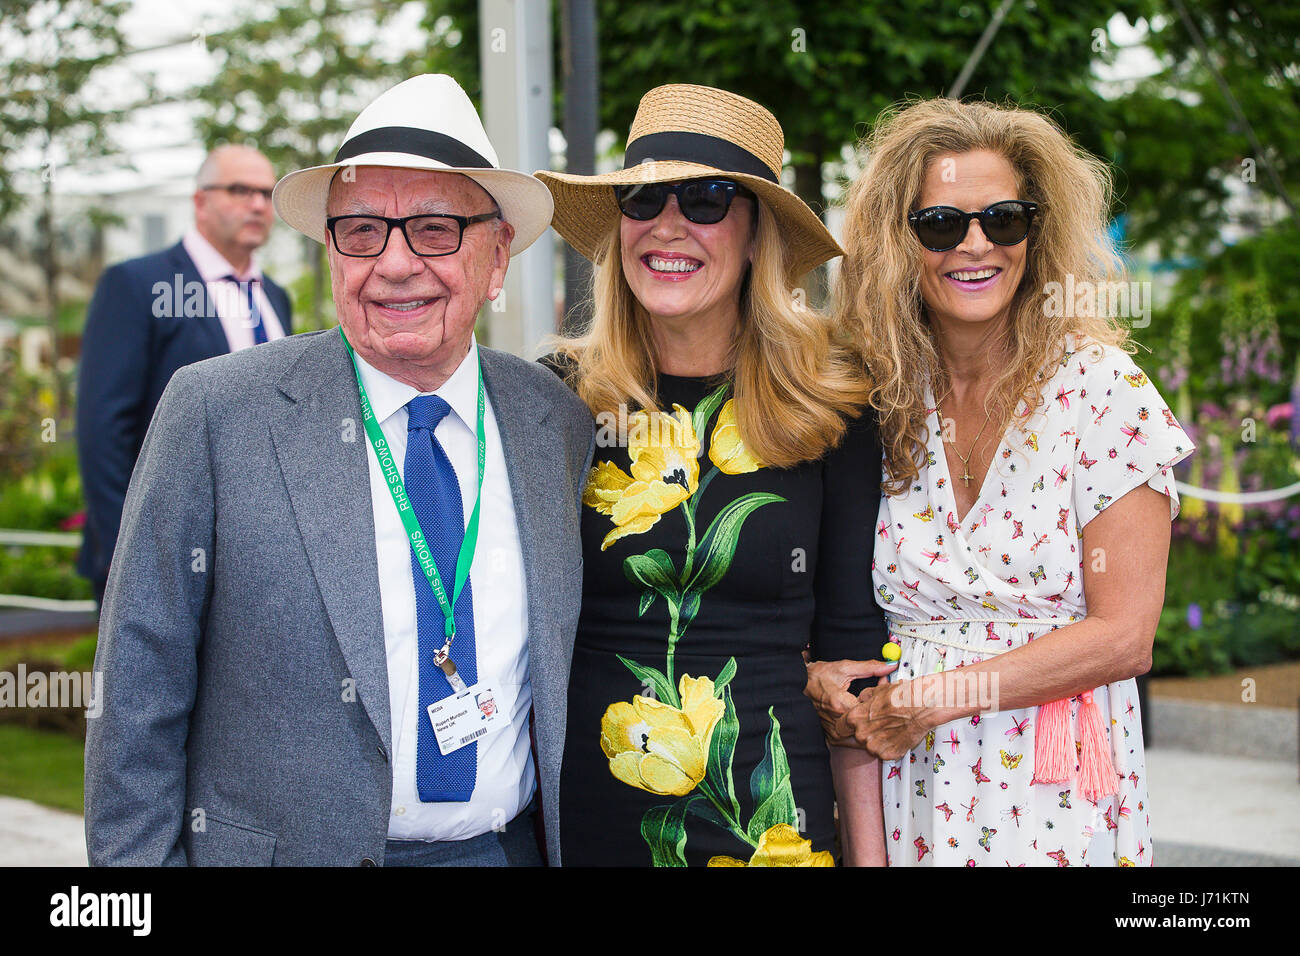 Chelsea London UK RHS Chelsea Flower Show Rupert Murdoch, Australian-born American media mogul and His Wife Jerry Murdoch together with Suzanne Wyman ife of former Rolling Stone Bill Wyman pose for photographers at Chelsea Flower Sow 2017 Credit: David Betteridge/Alamy Live News Stock Photo